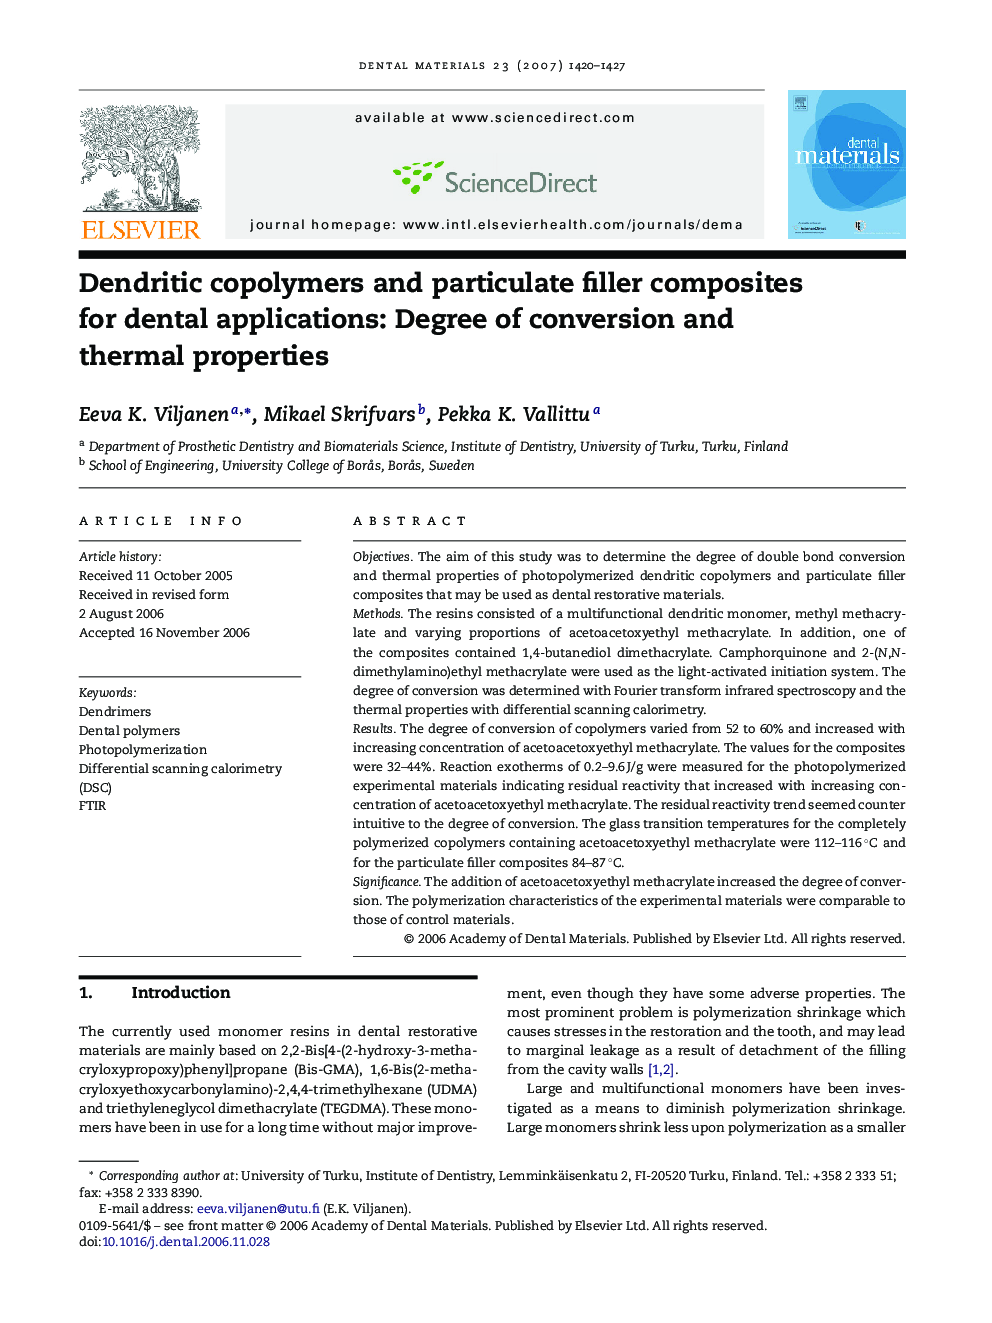 Dendritic copolymers and particulate filler composites for dental applications: Degree of conversion and thermal properties